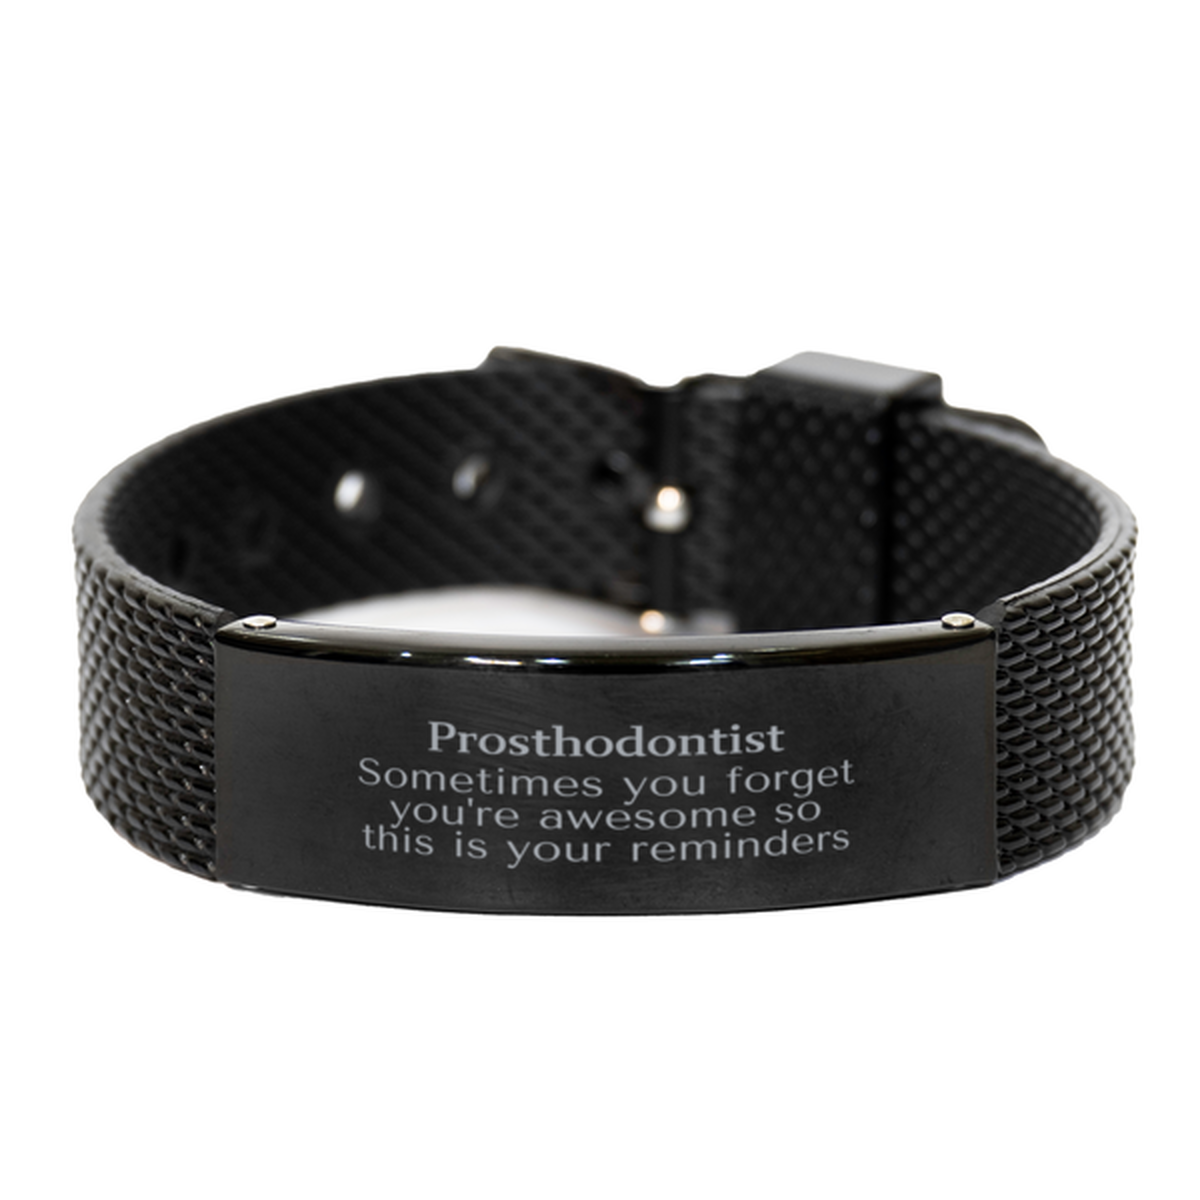 Sentimental Prosthodontist Black Shark Mesh Bracelet, Prosthodontist Sometimes you forget you're awesome so this is your reminders, Graduation Christmas Birthday Gifts for Prosthodontist, Men, Women, Coworkers